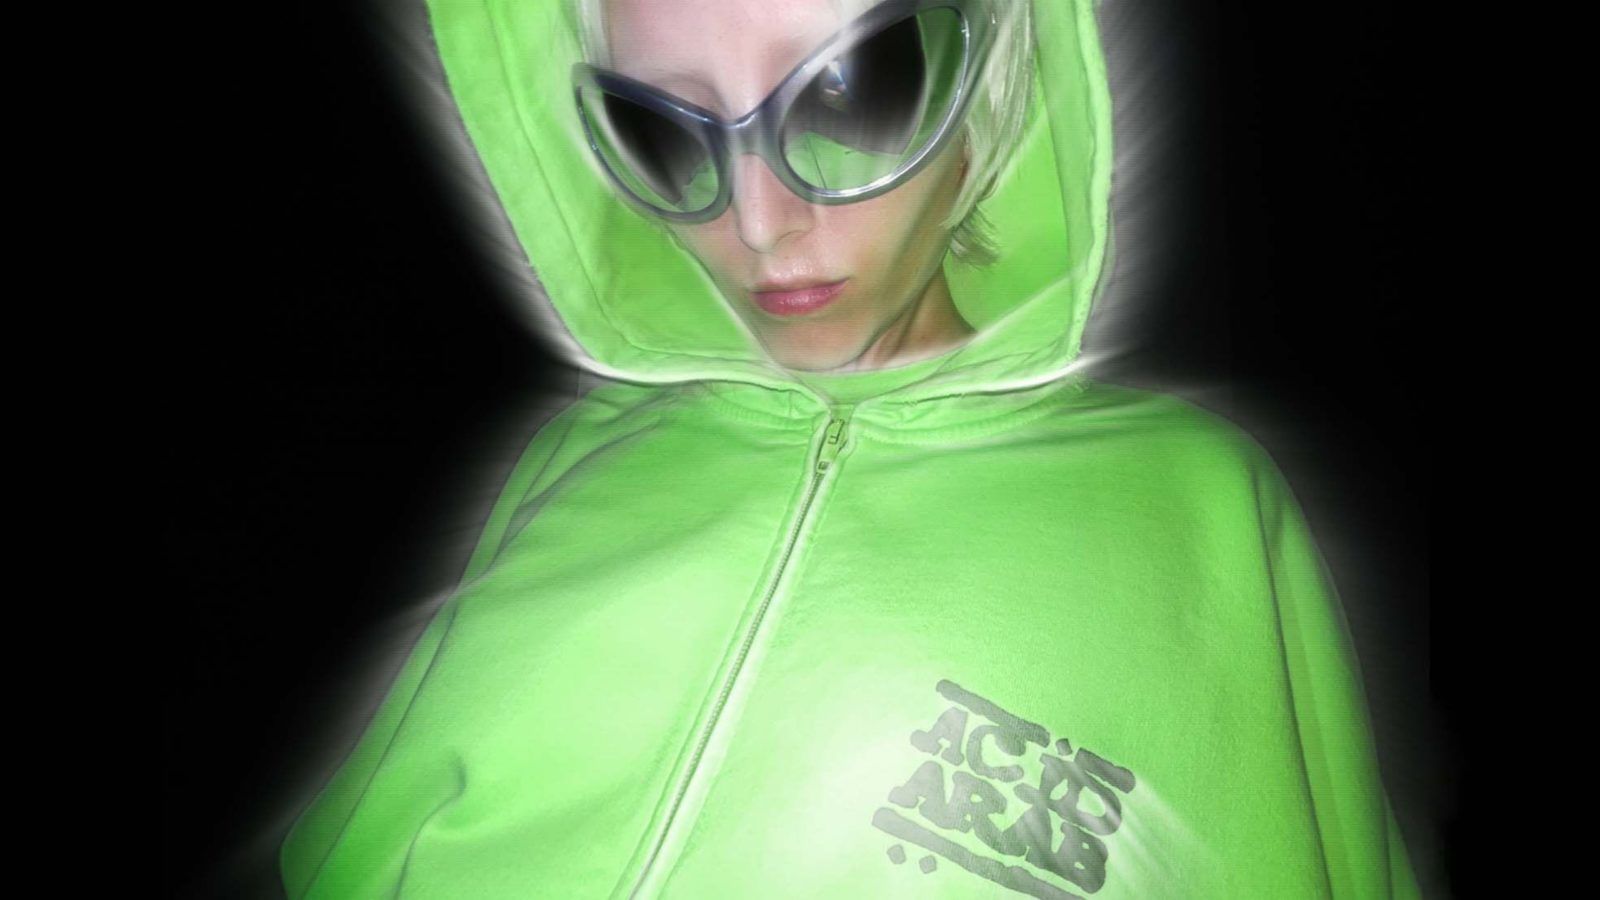 Acid Arab curates an exclusive playlist and merch collab with Balenciaga